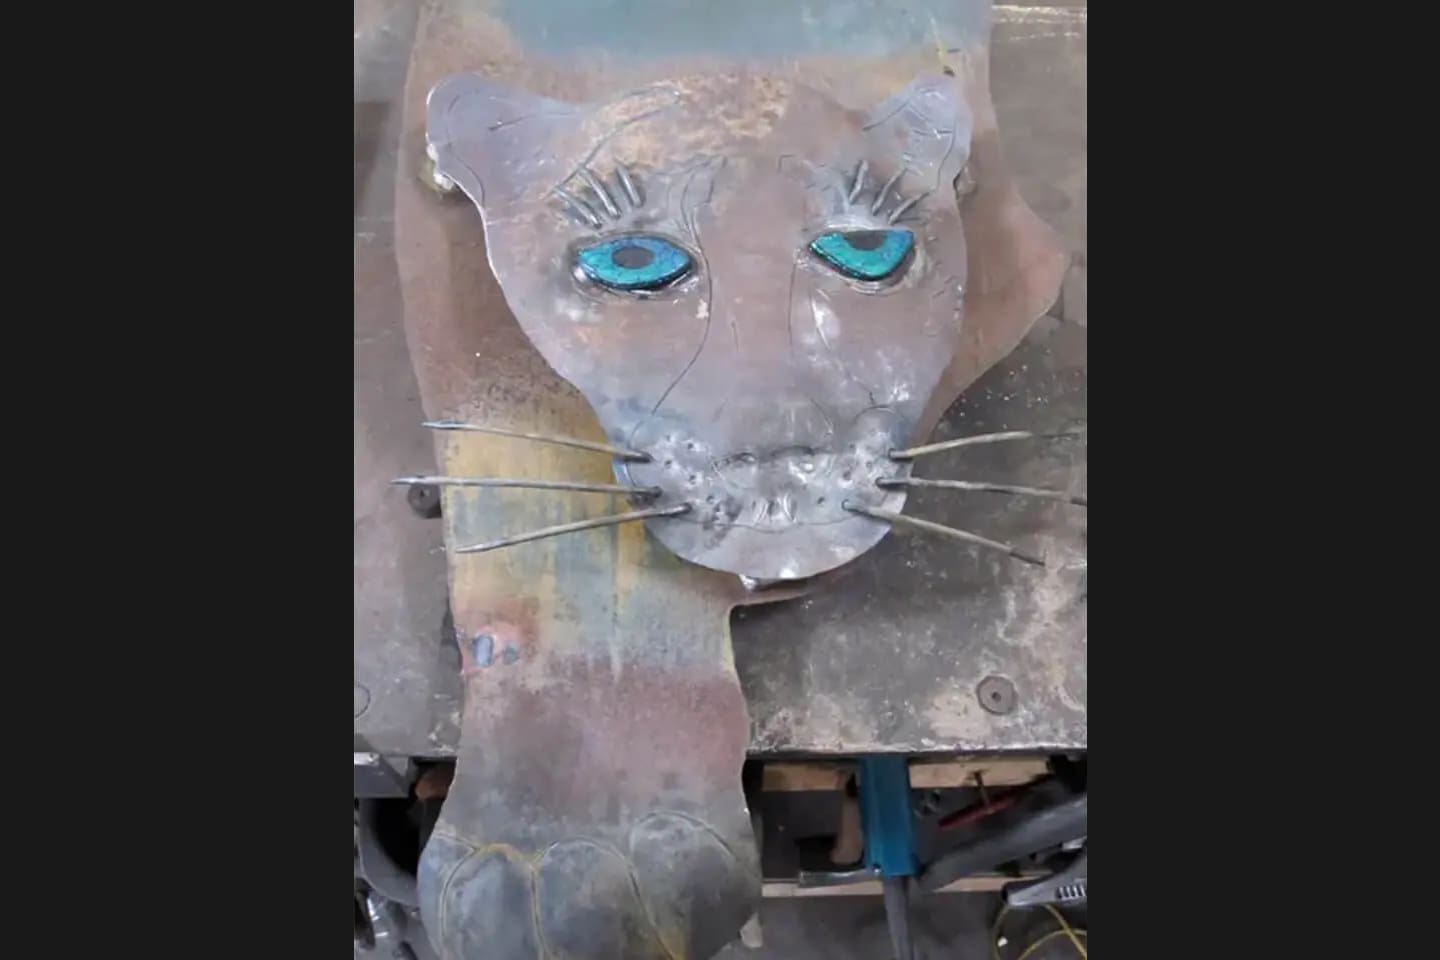 A cat sculpture with blue eyes and some paint on it.